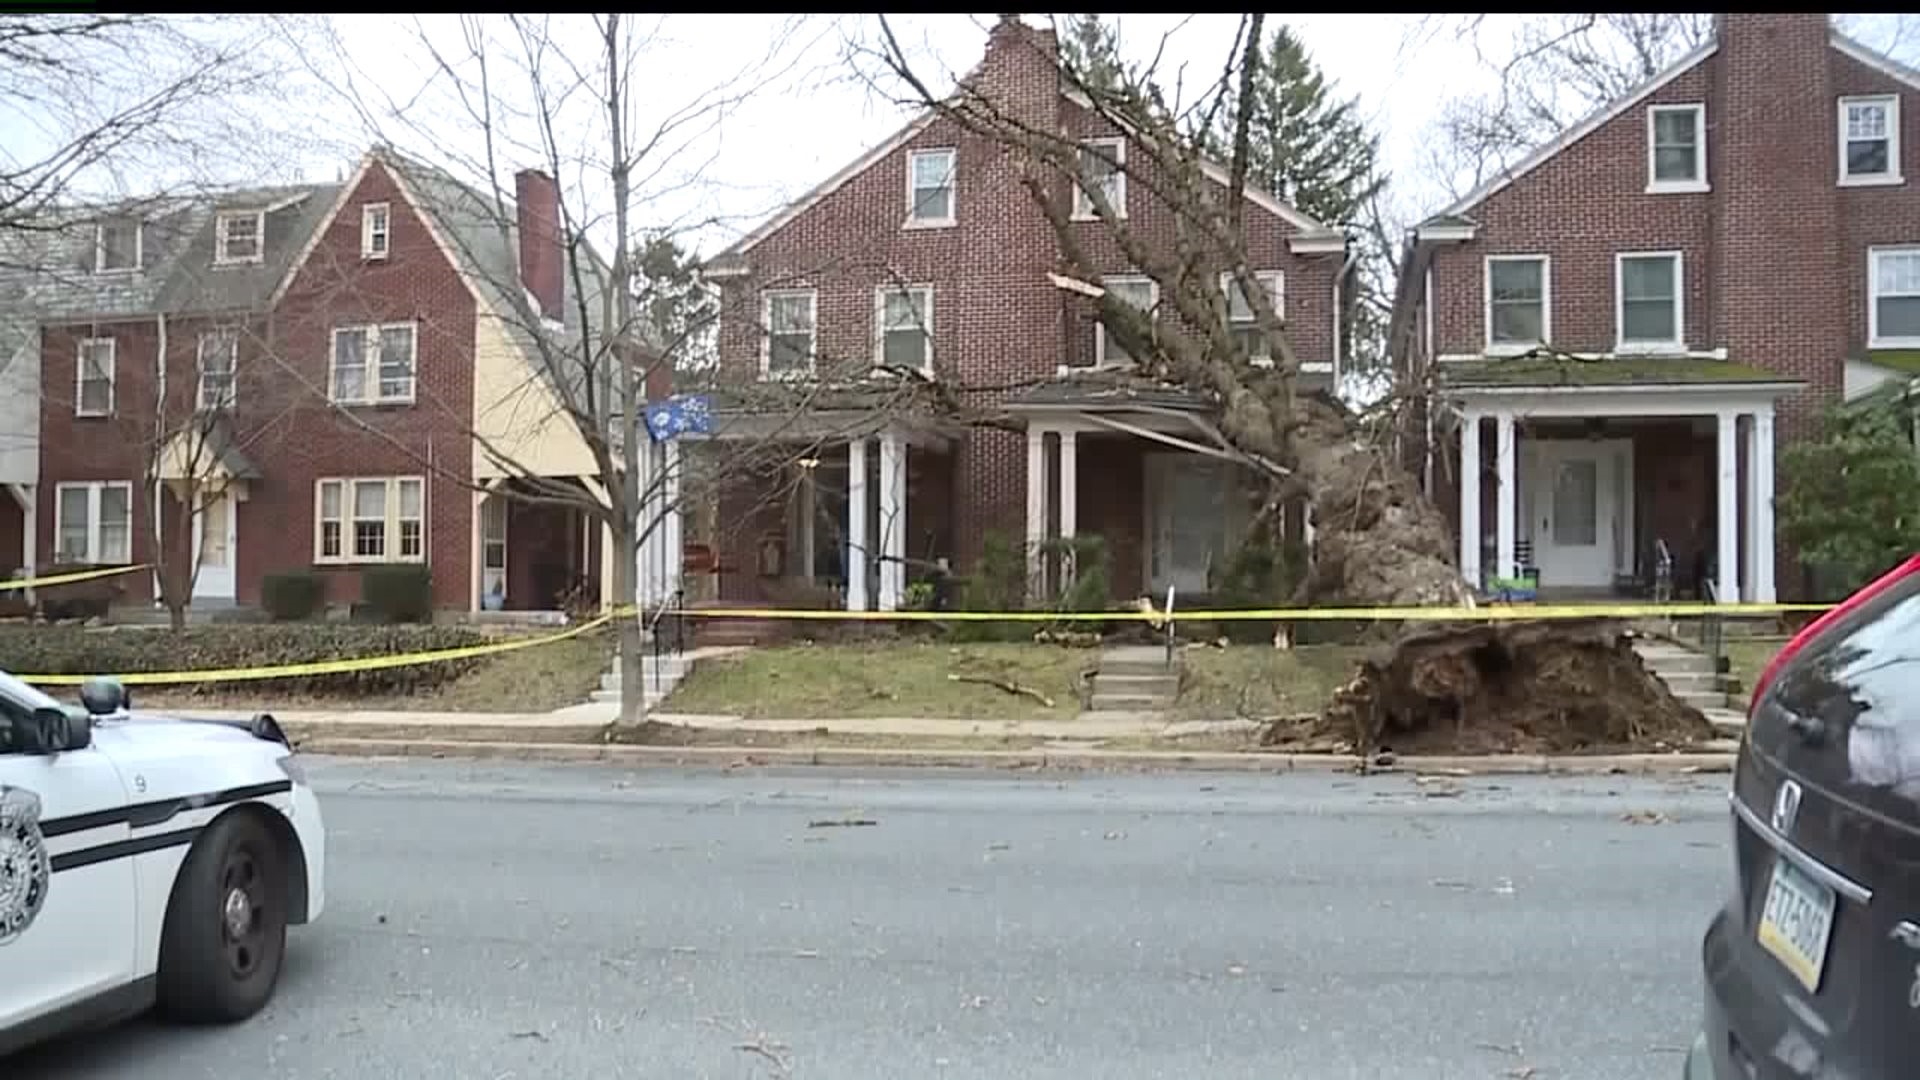 Blistering wind conditions across central PA leave a mess behind